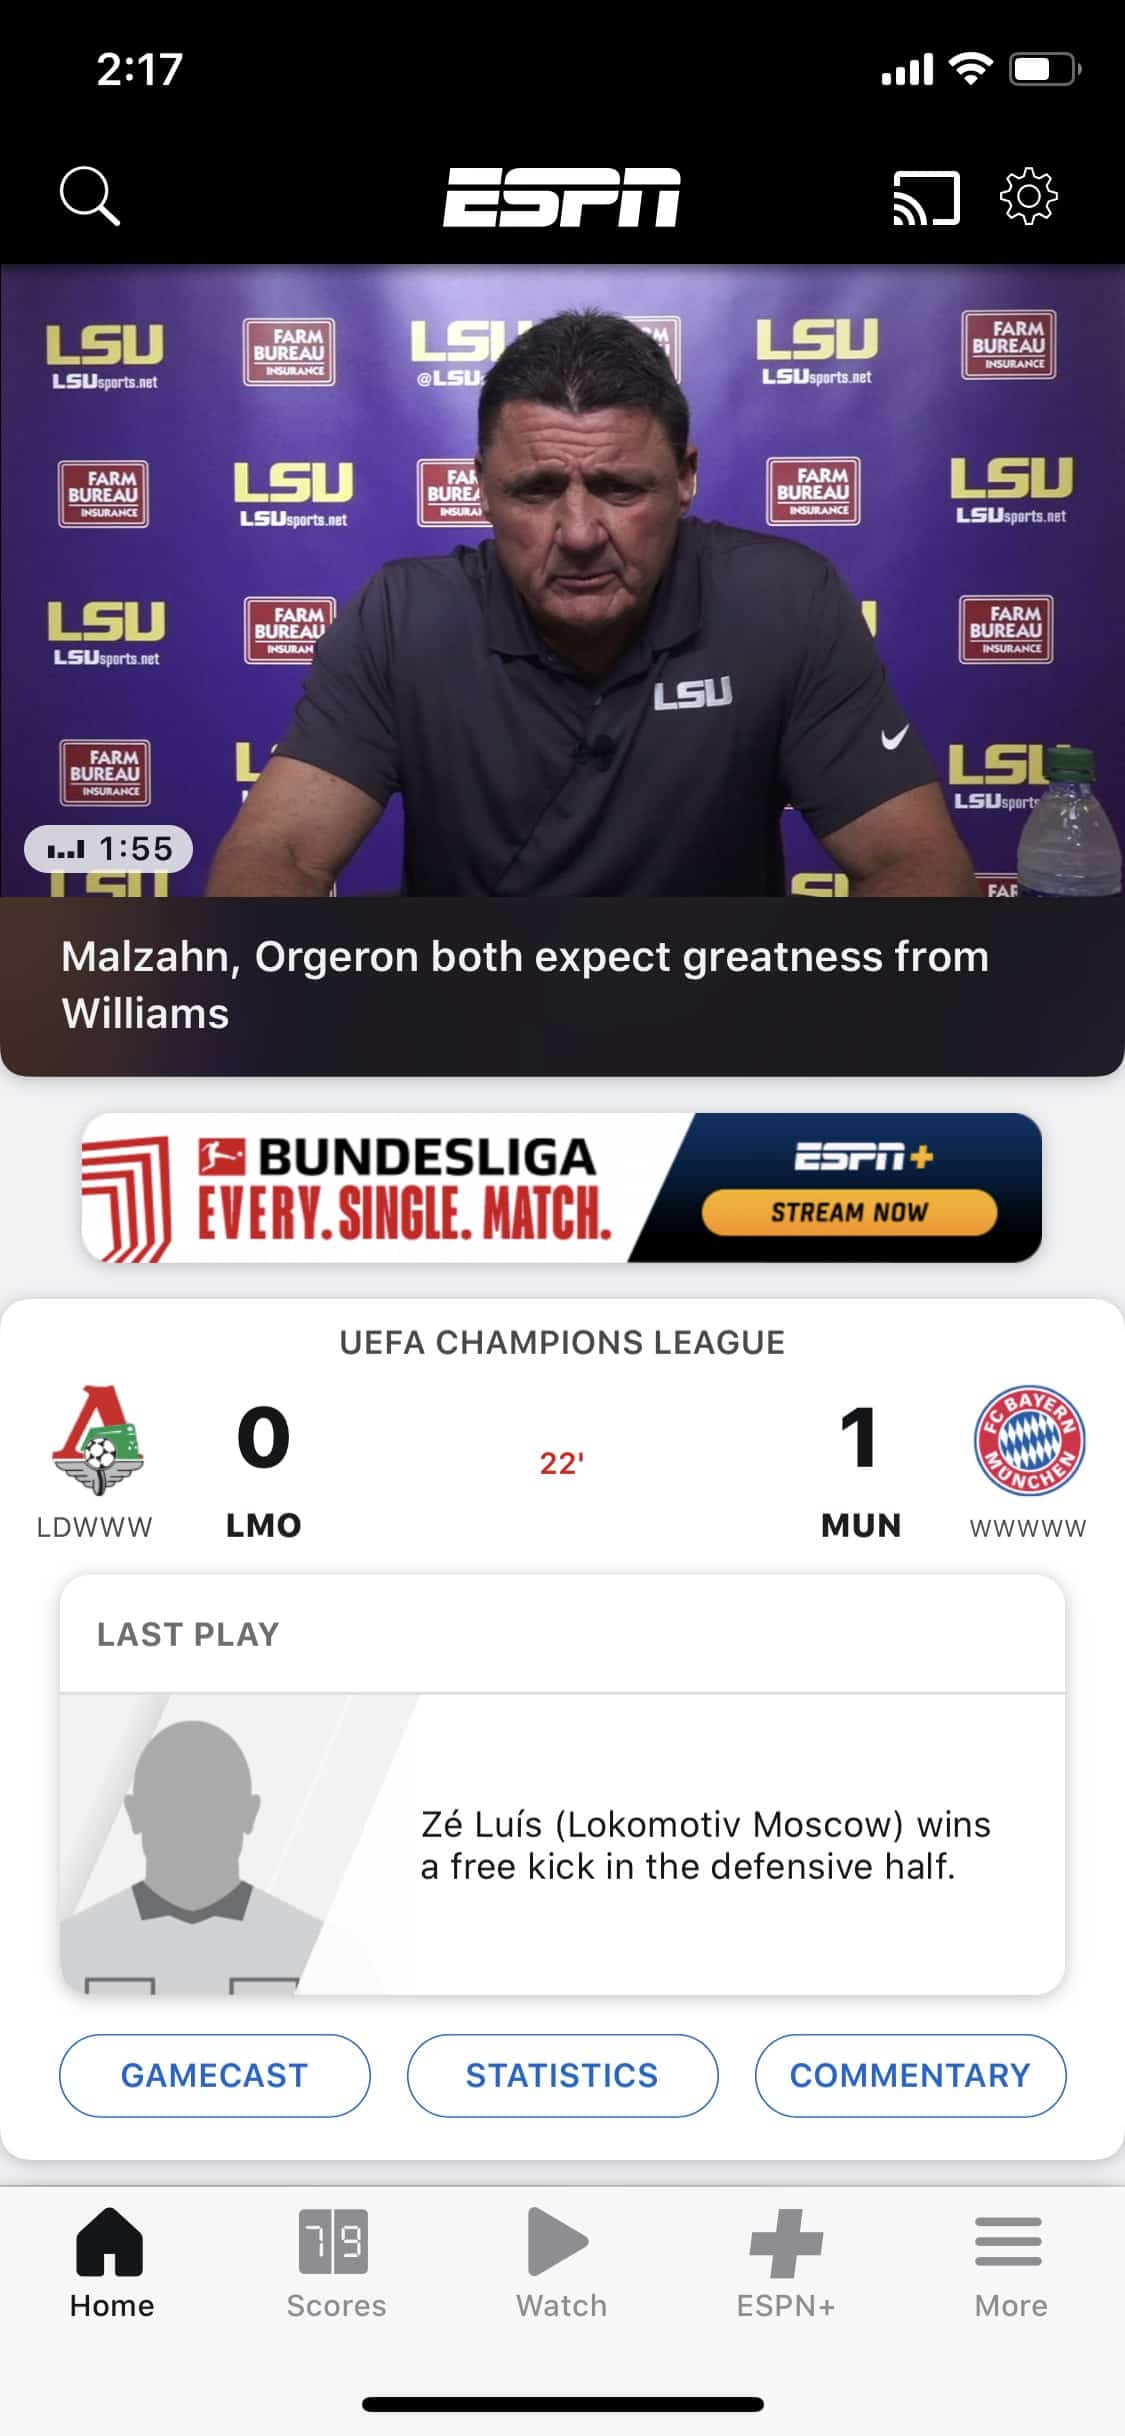 ESPN+ Live Streaming Review: Everything You Need to Know to Watch